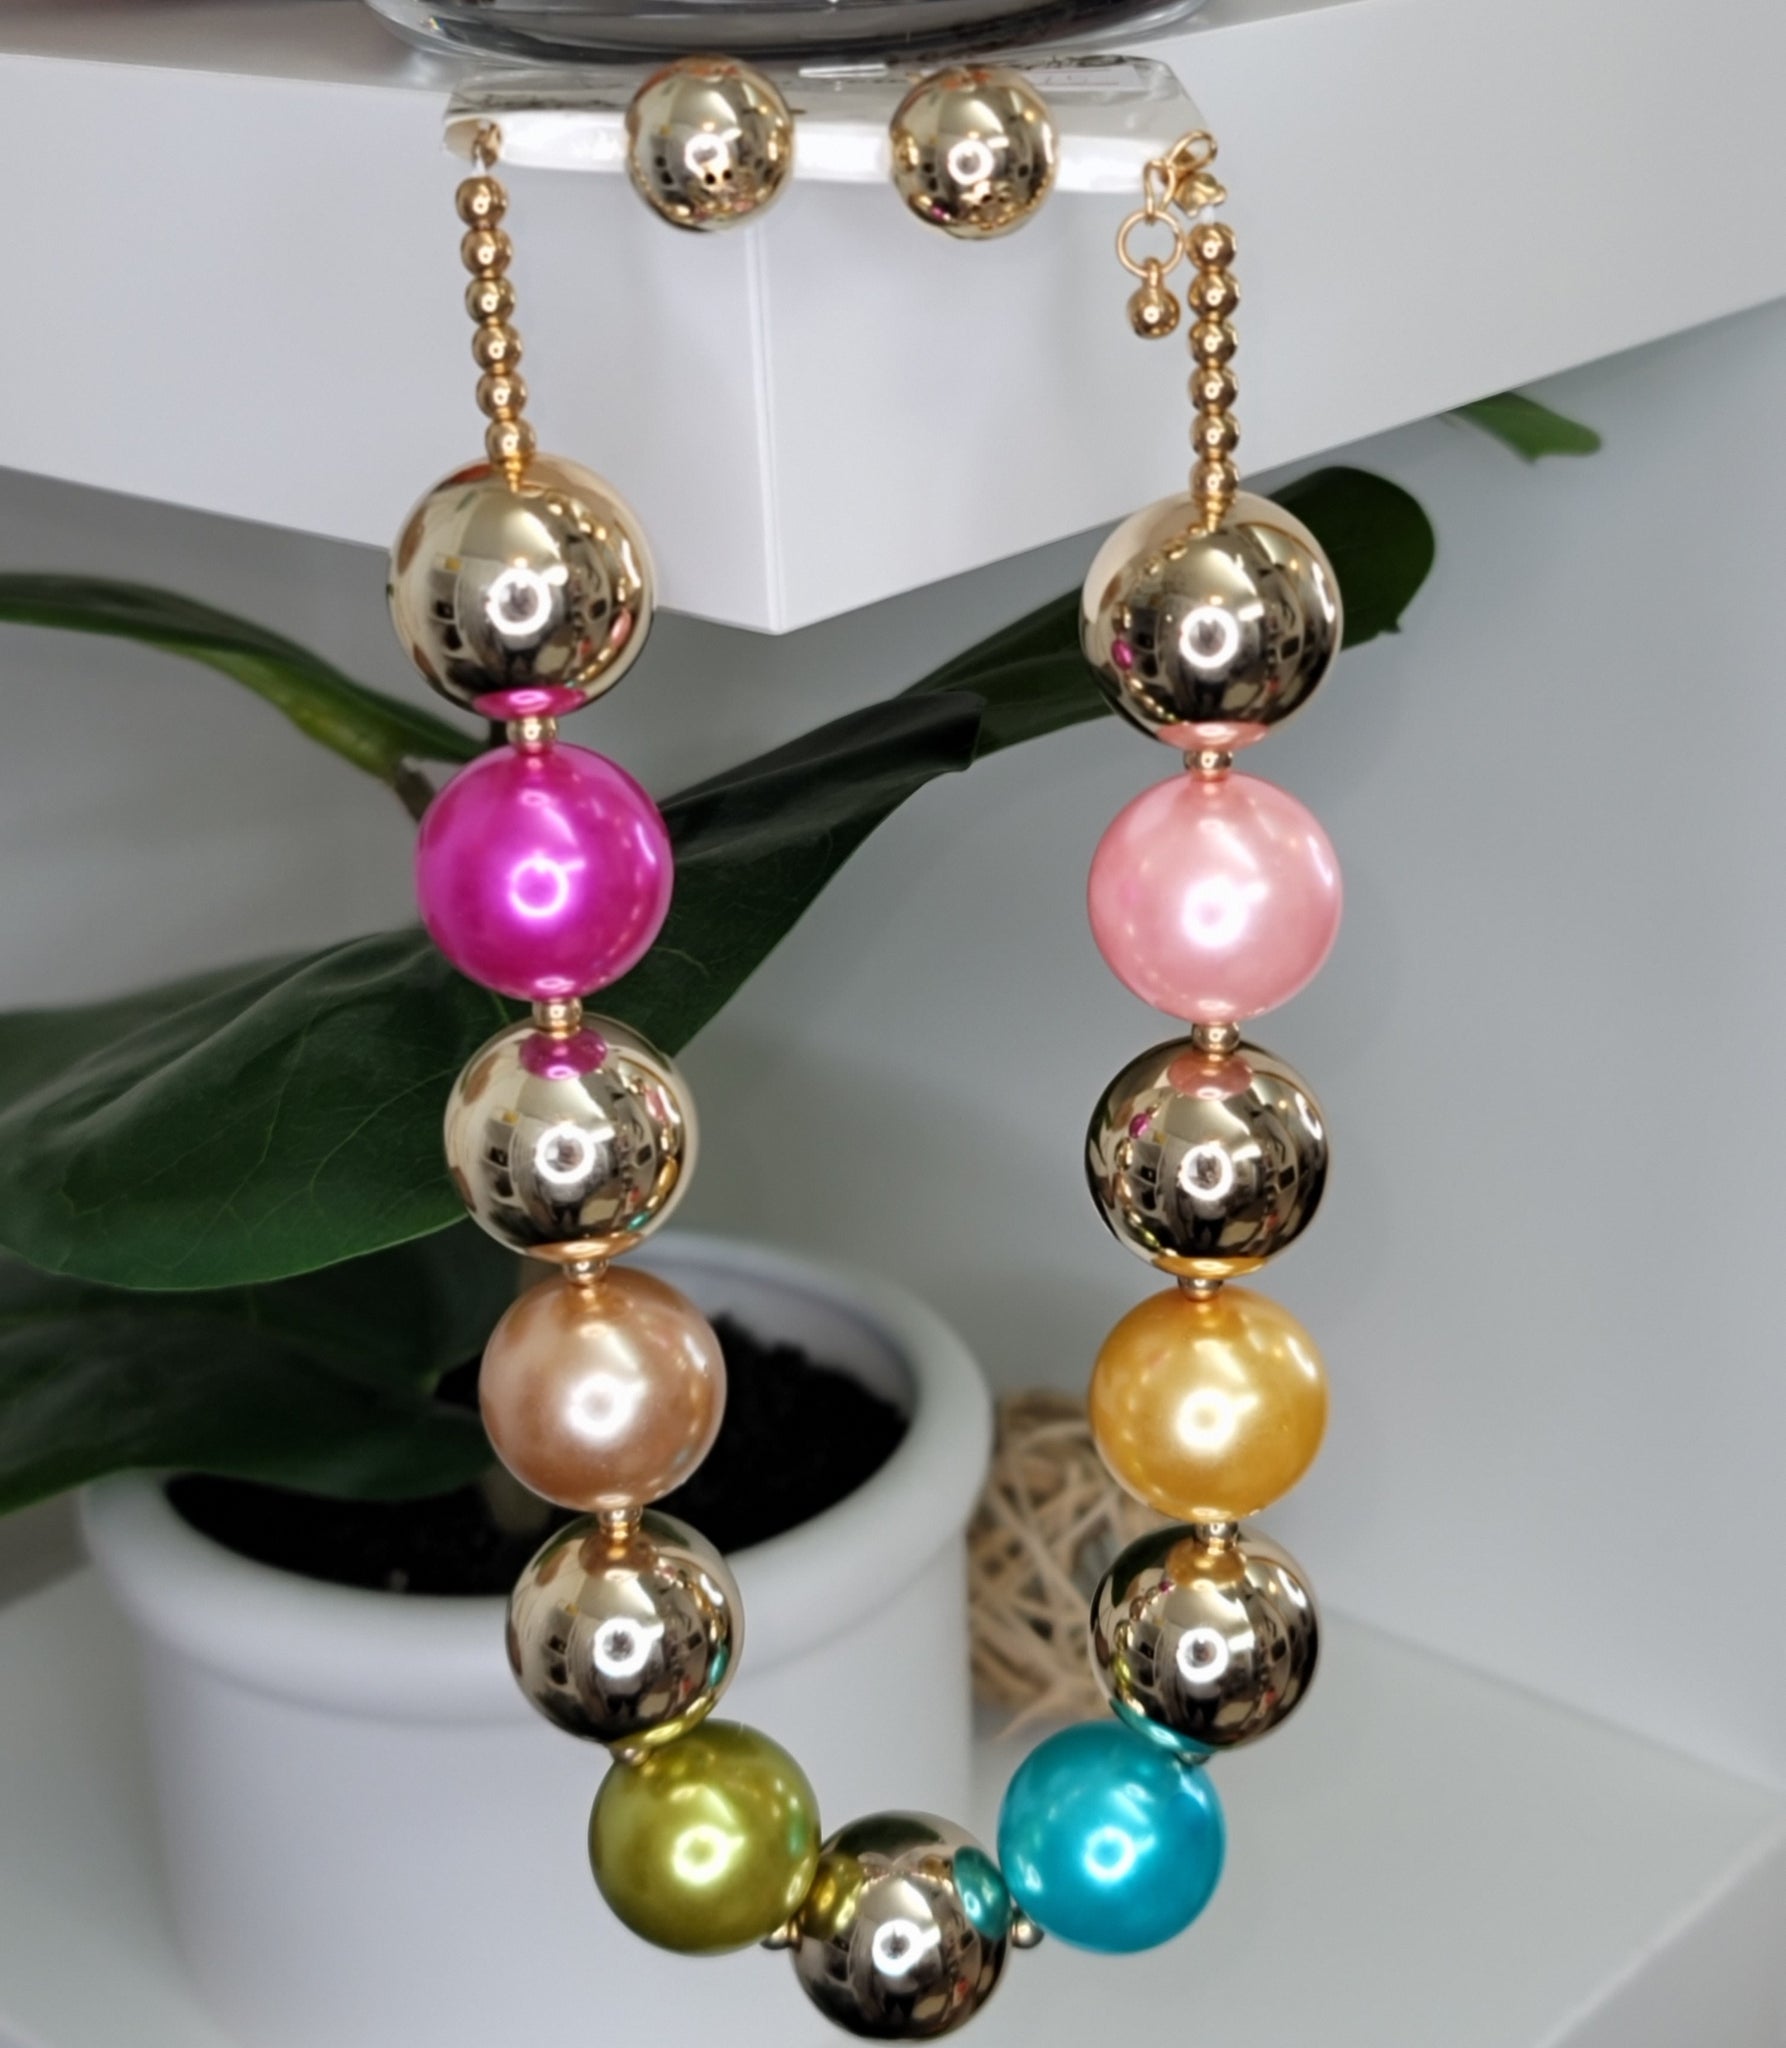 Dove handmade colorful pearl neck beads